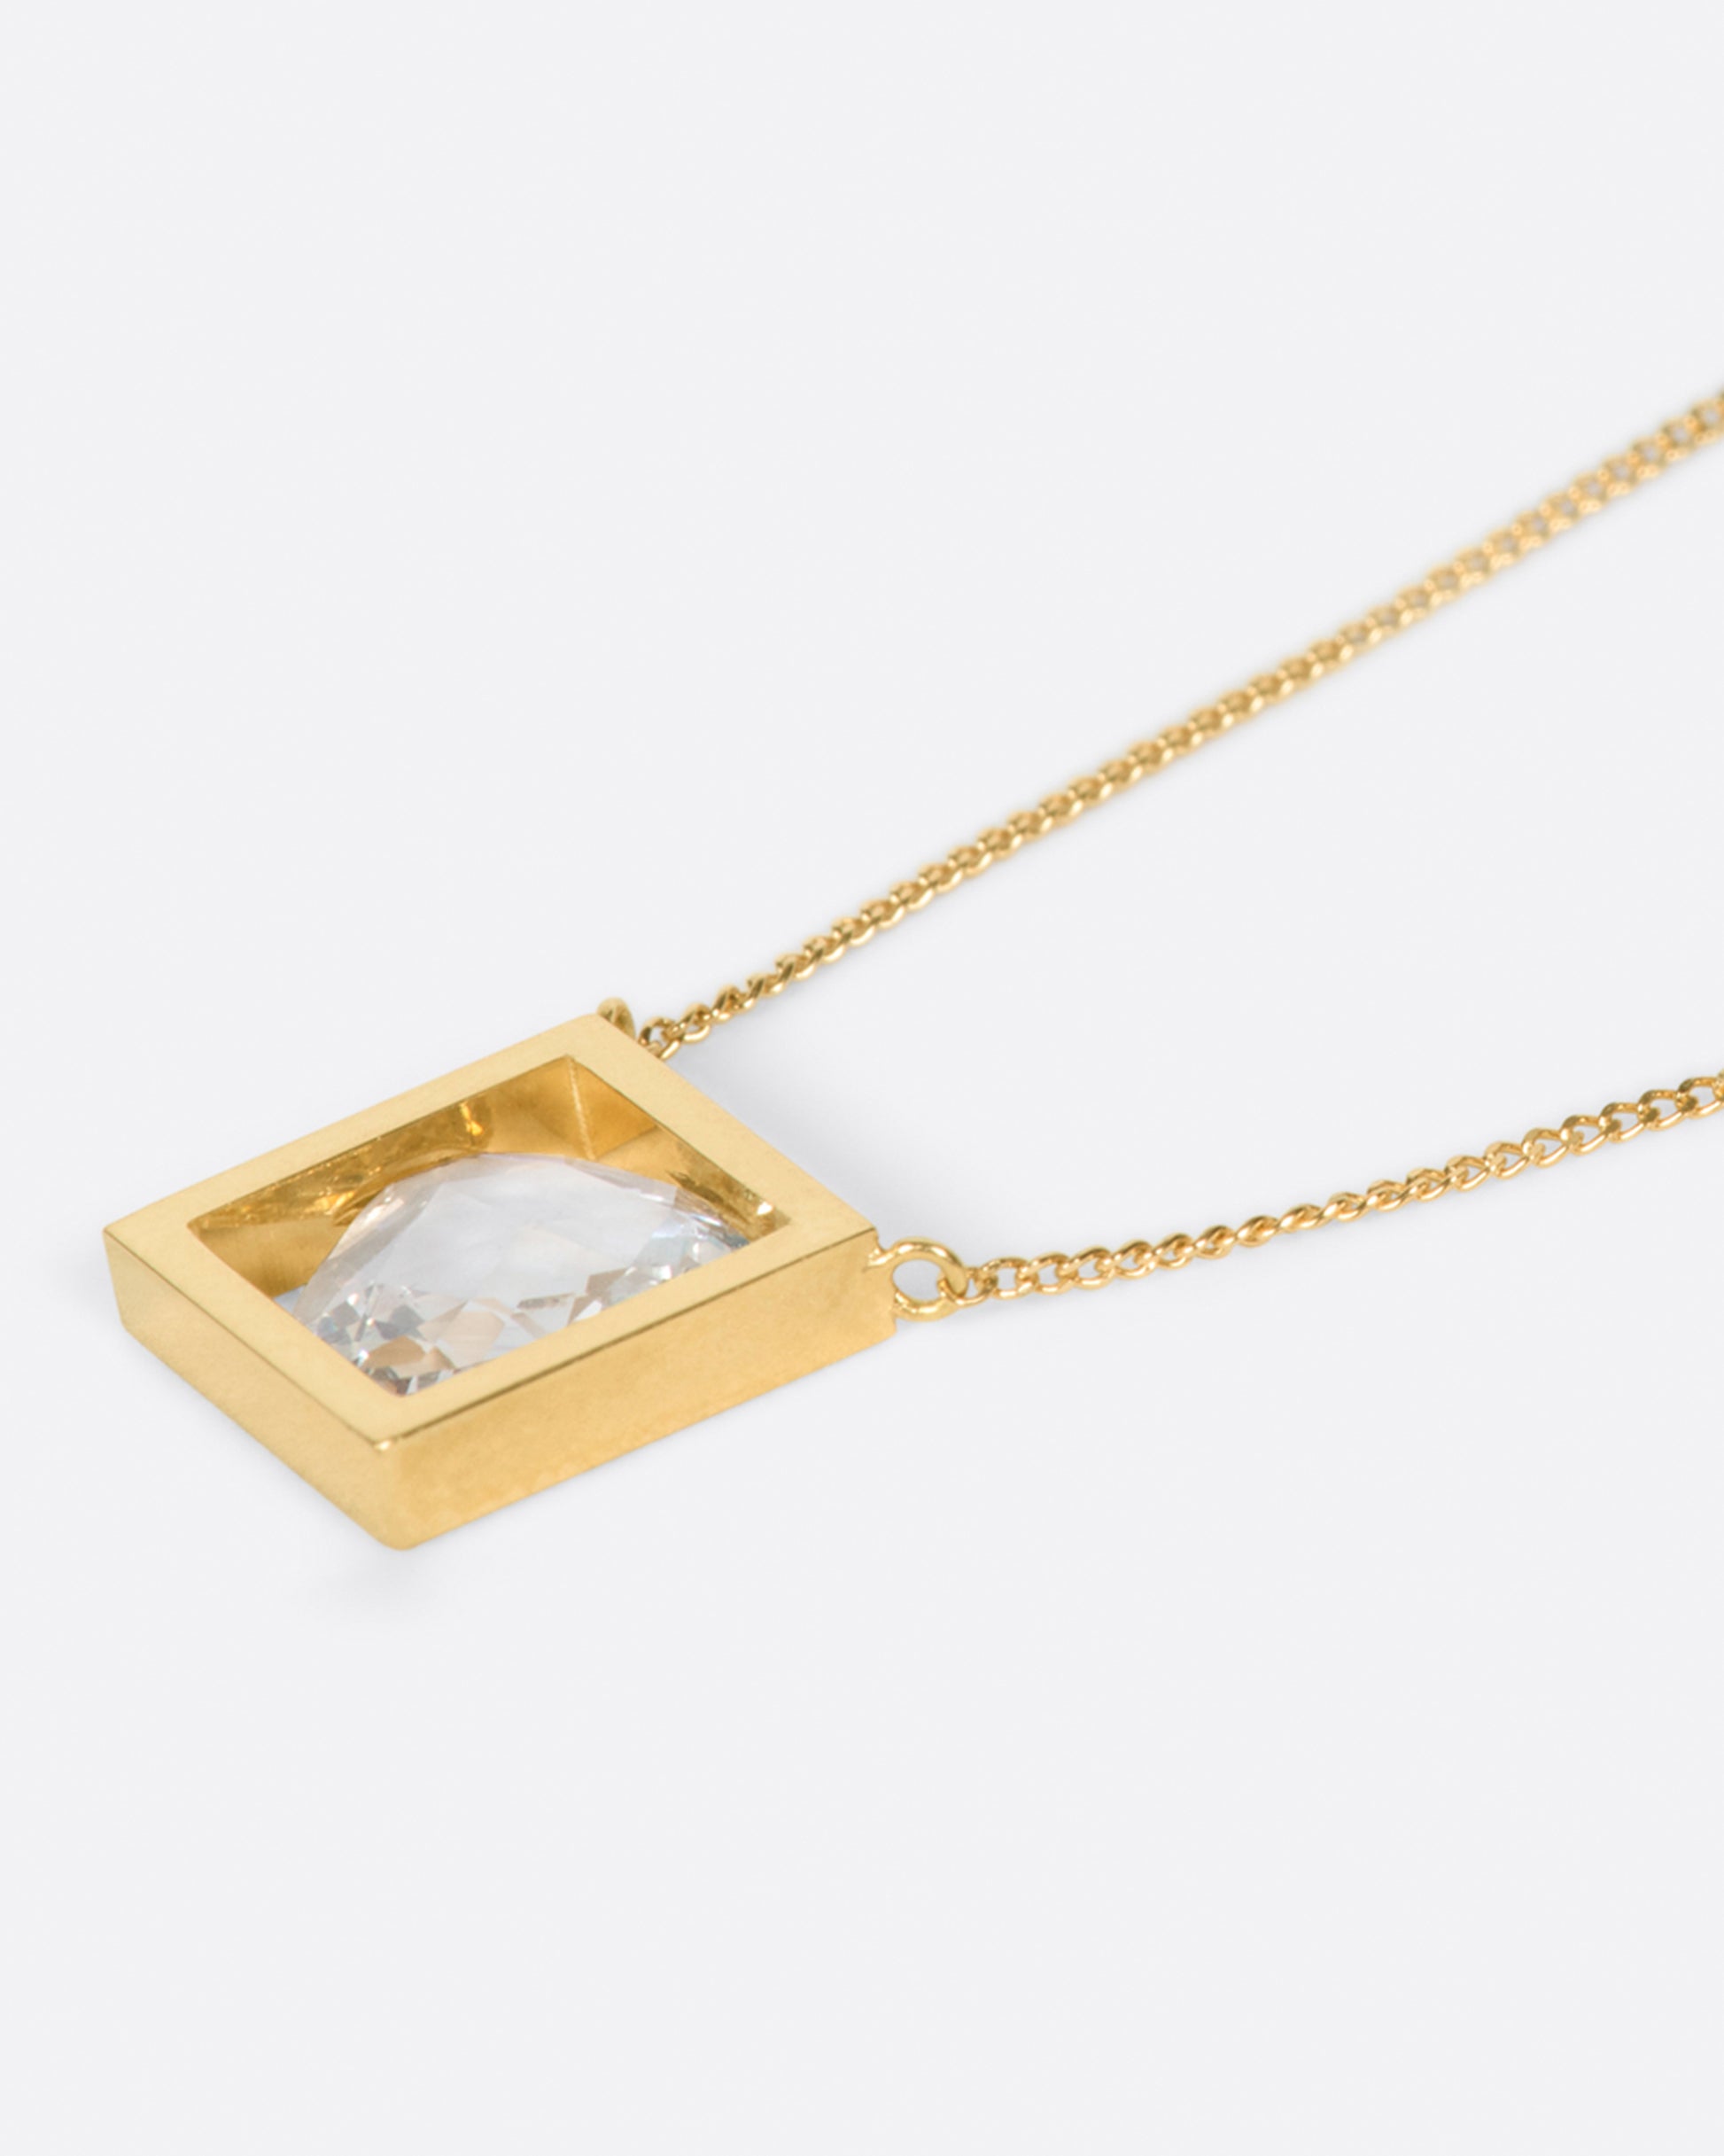 A square pendant necklace with a rose cut diamond inside, shown laying flat. 